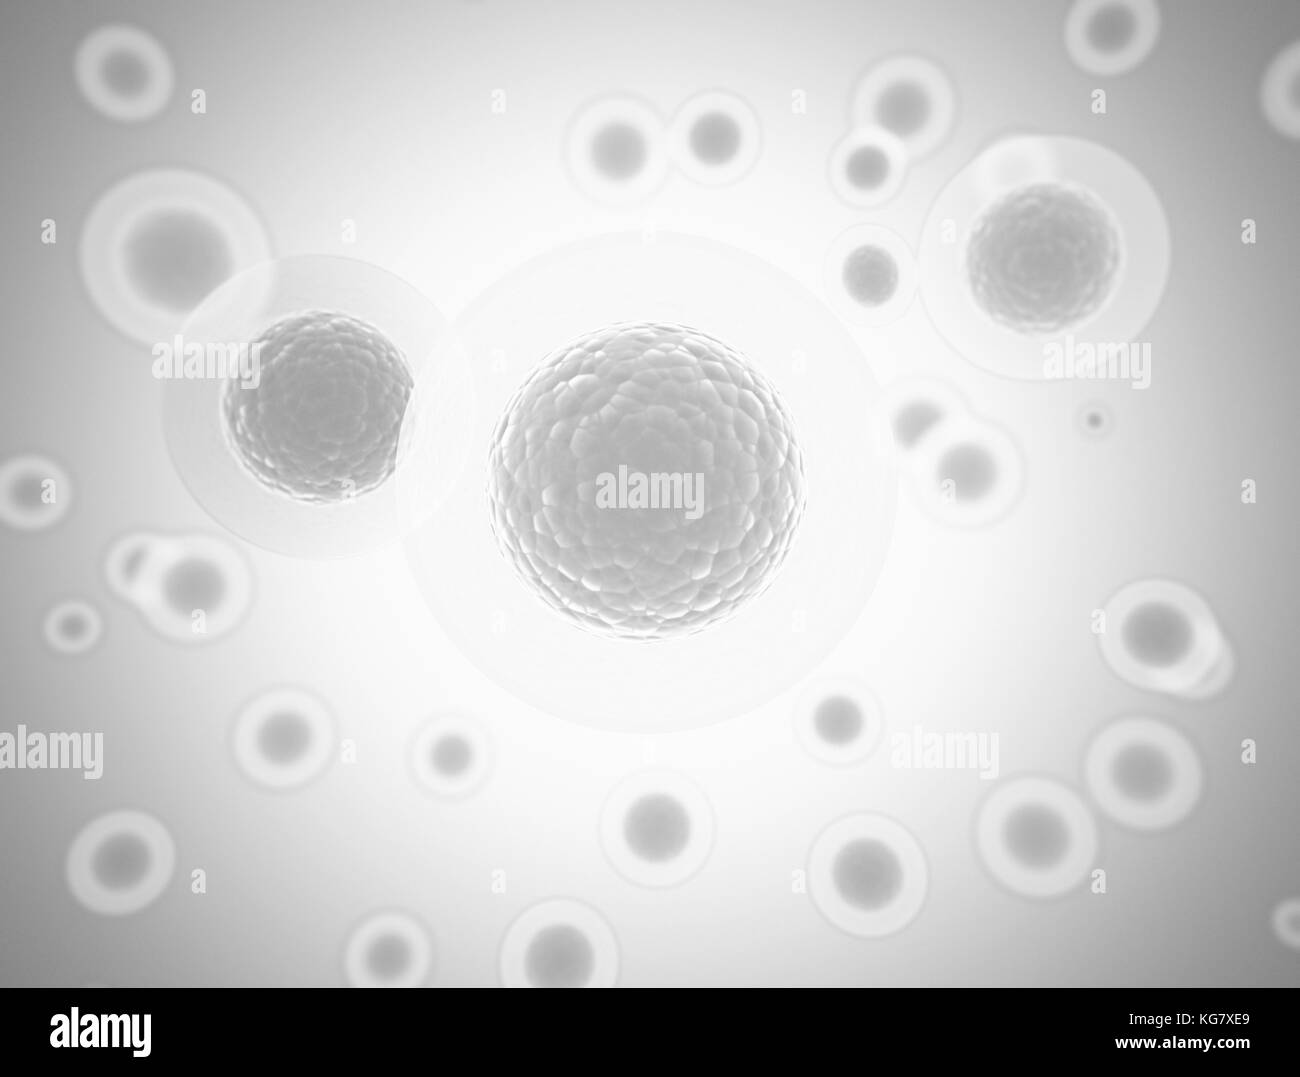 Cells under microscope. Science and medical background. 3D render Stock Photo